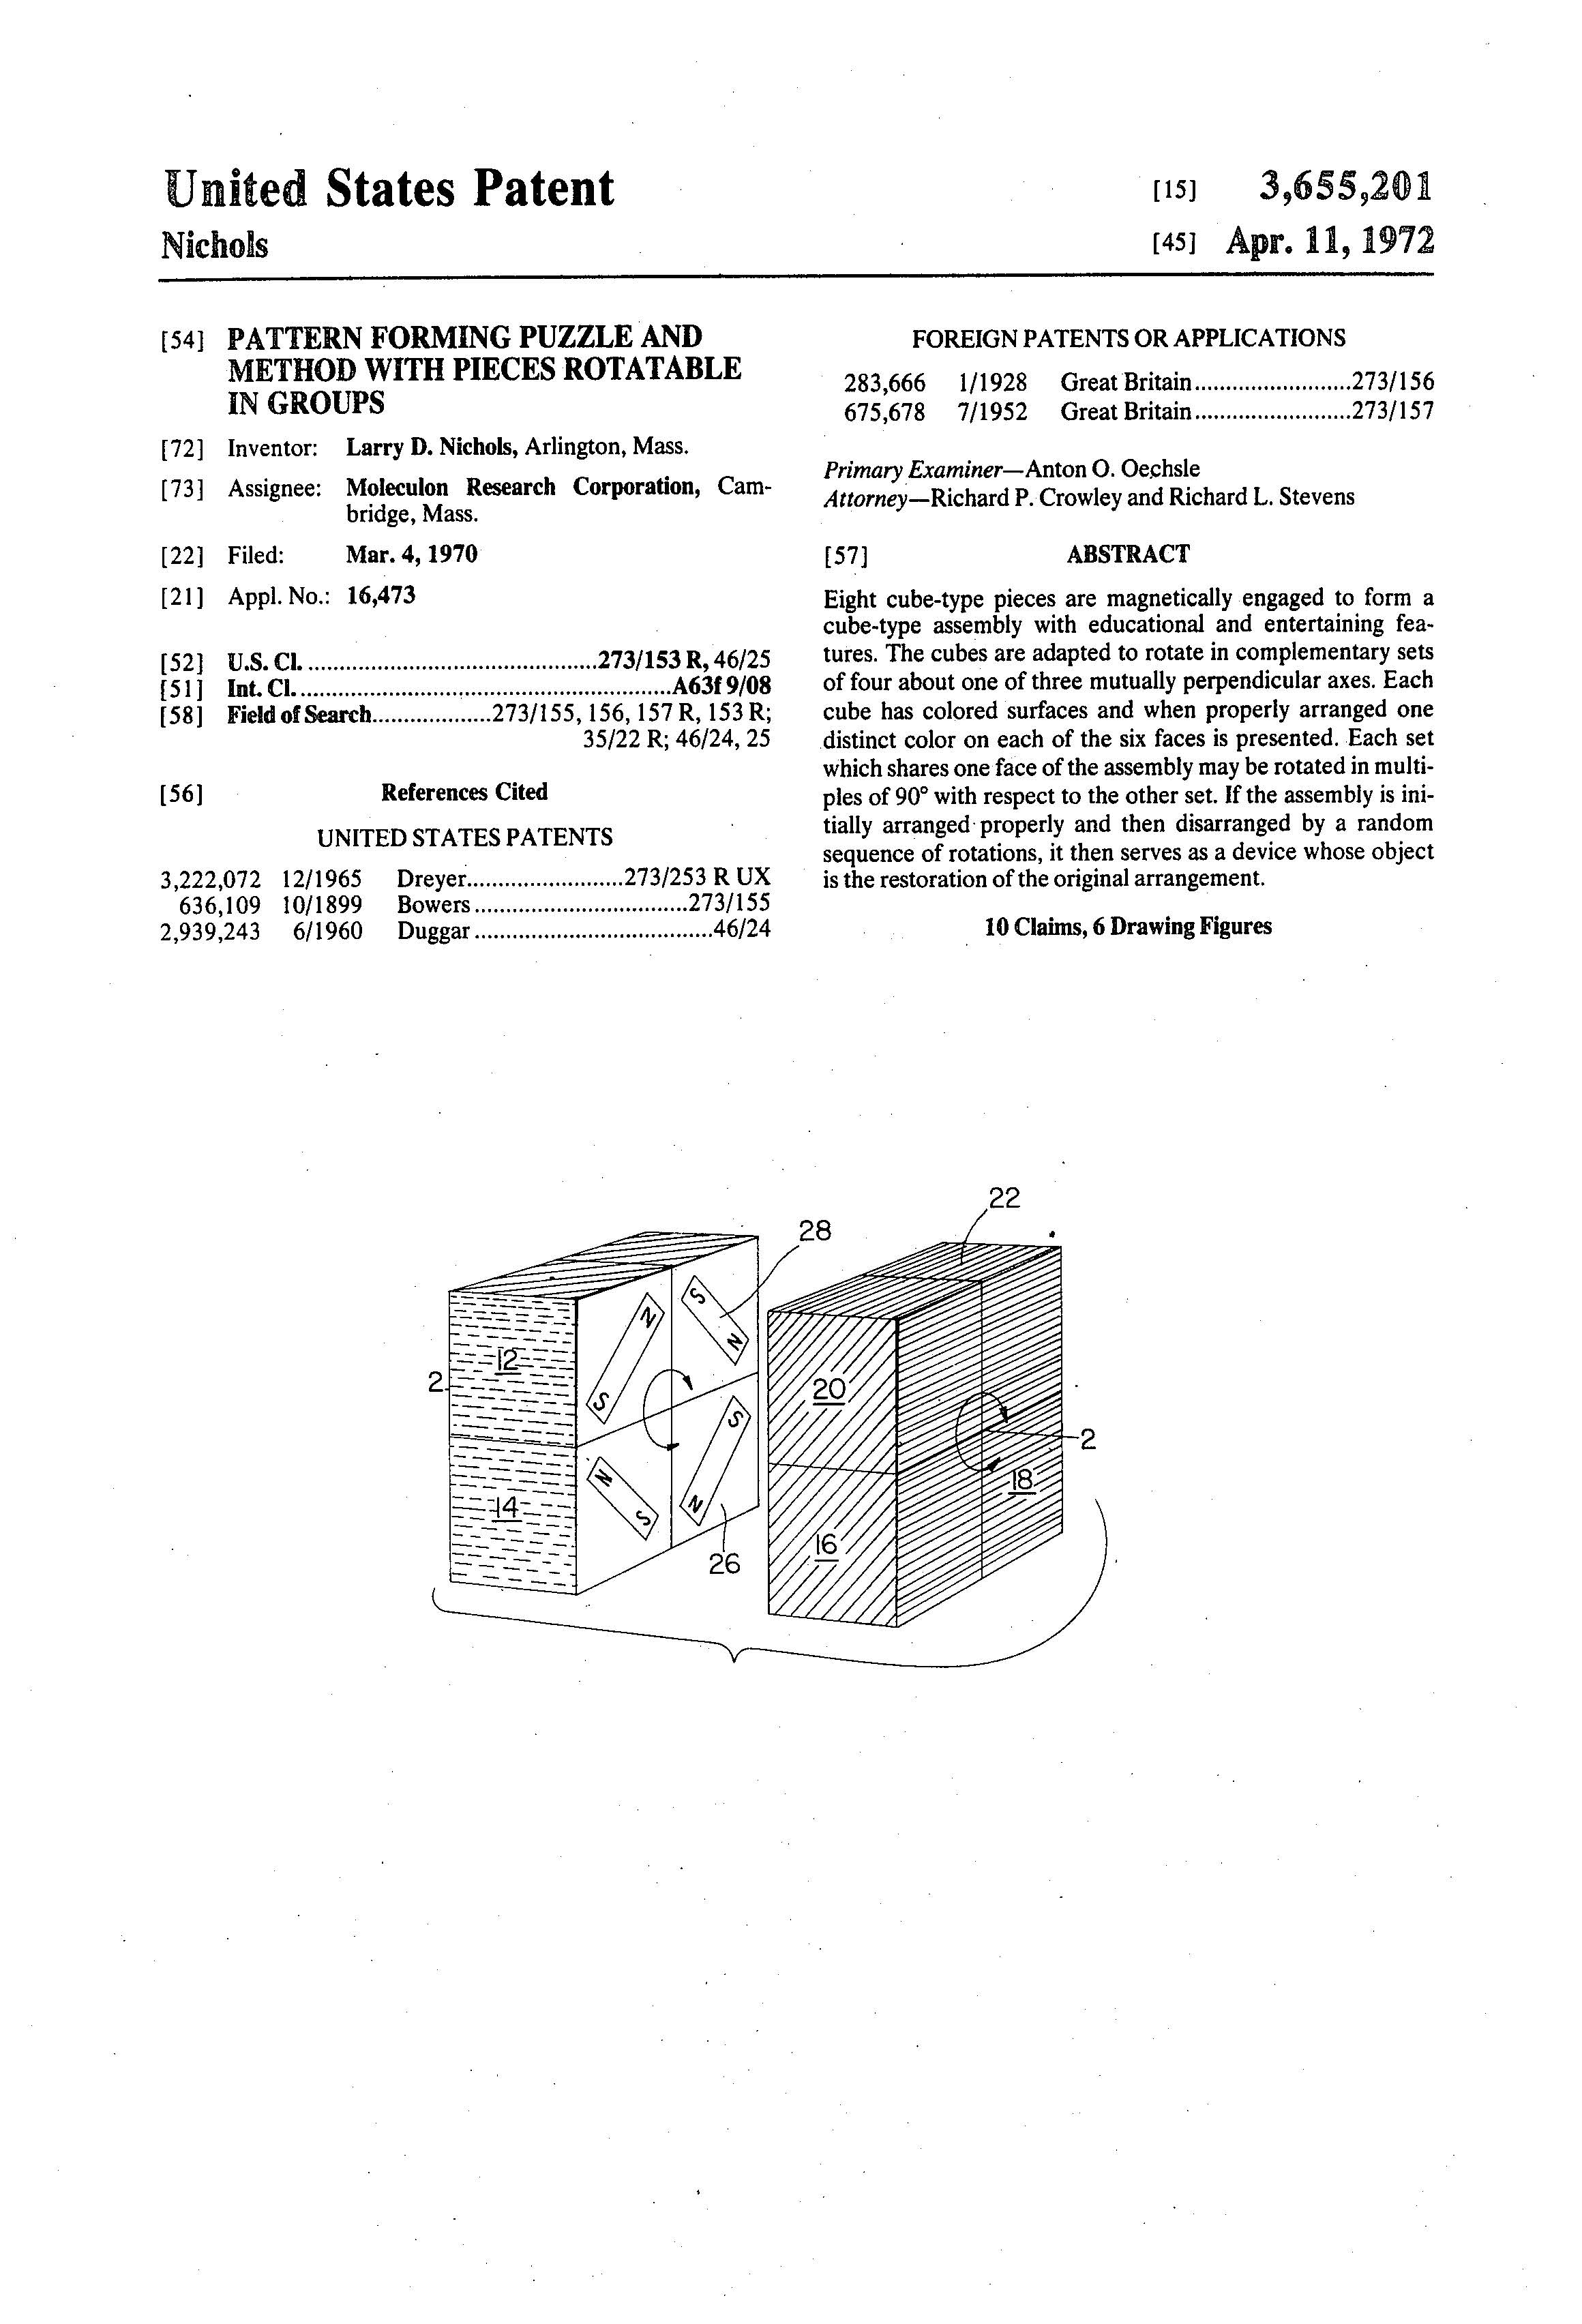 Patent-Illustration-Pattern-Forming-Puzzle-and-Method-With-Pieces-Rotatable-in-Groups_Page_1